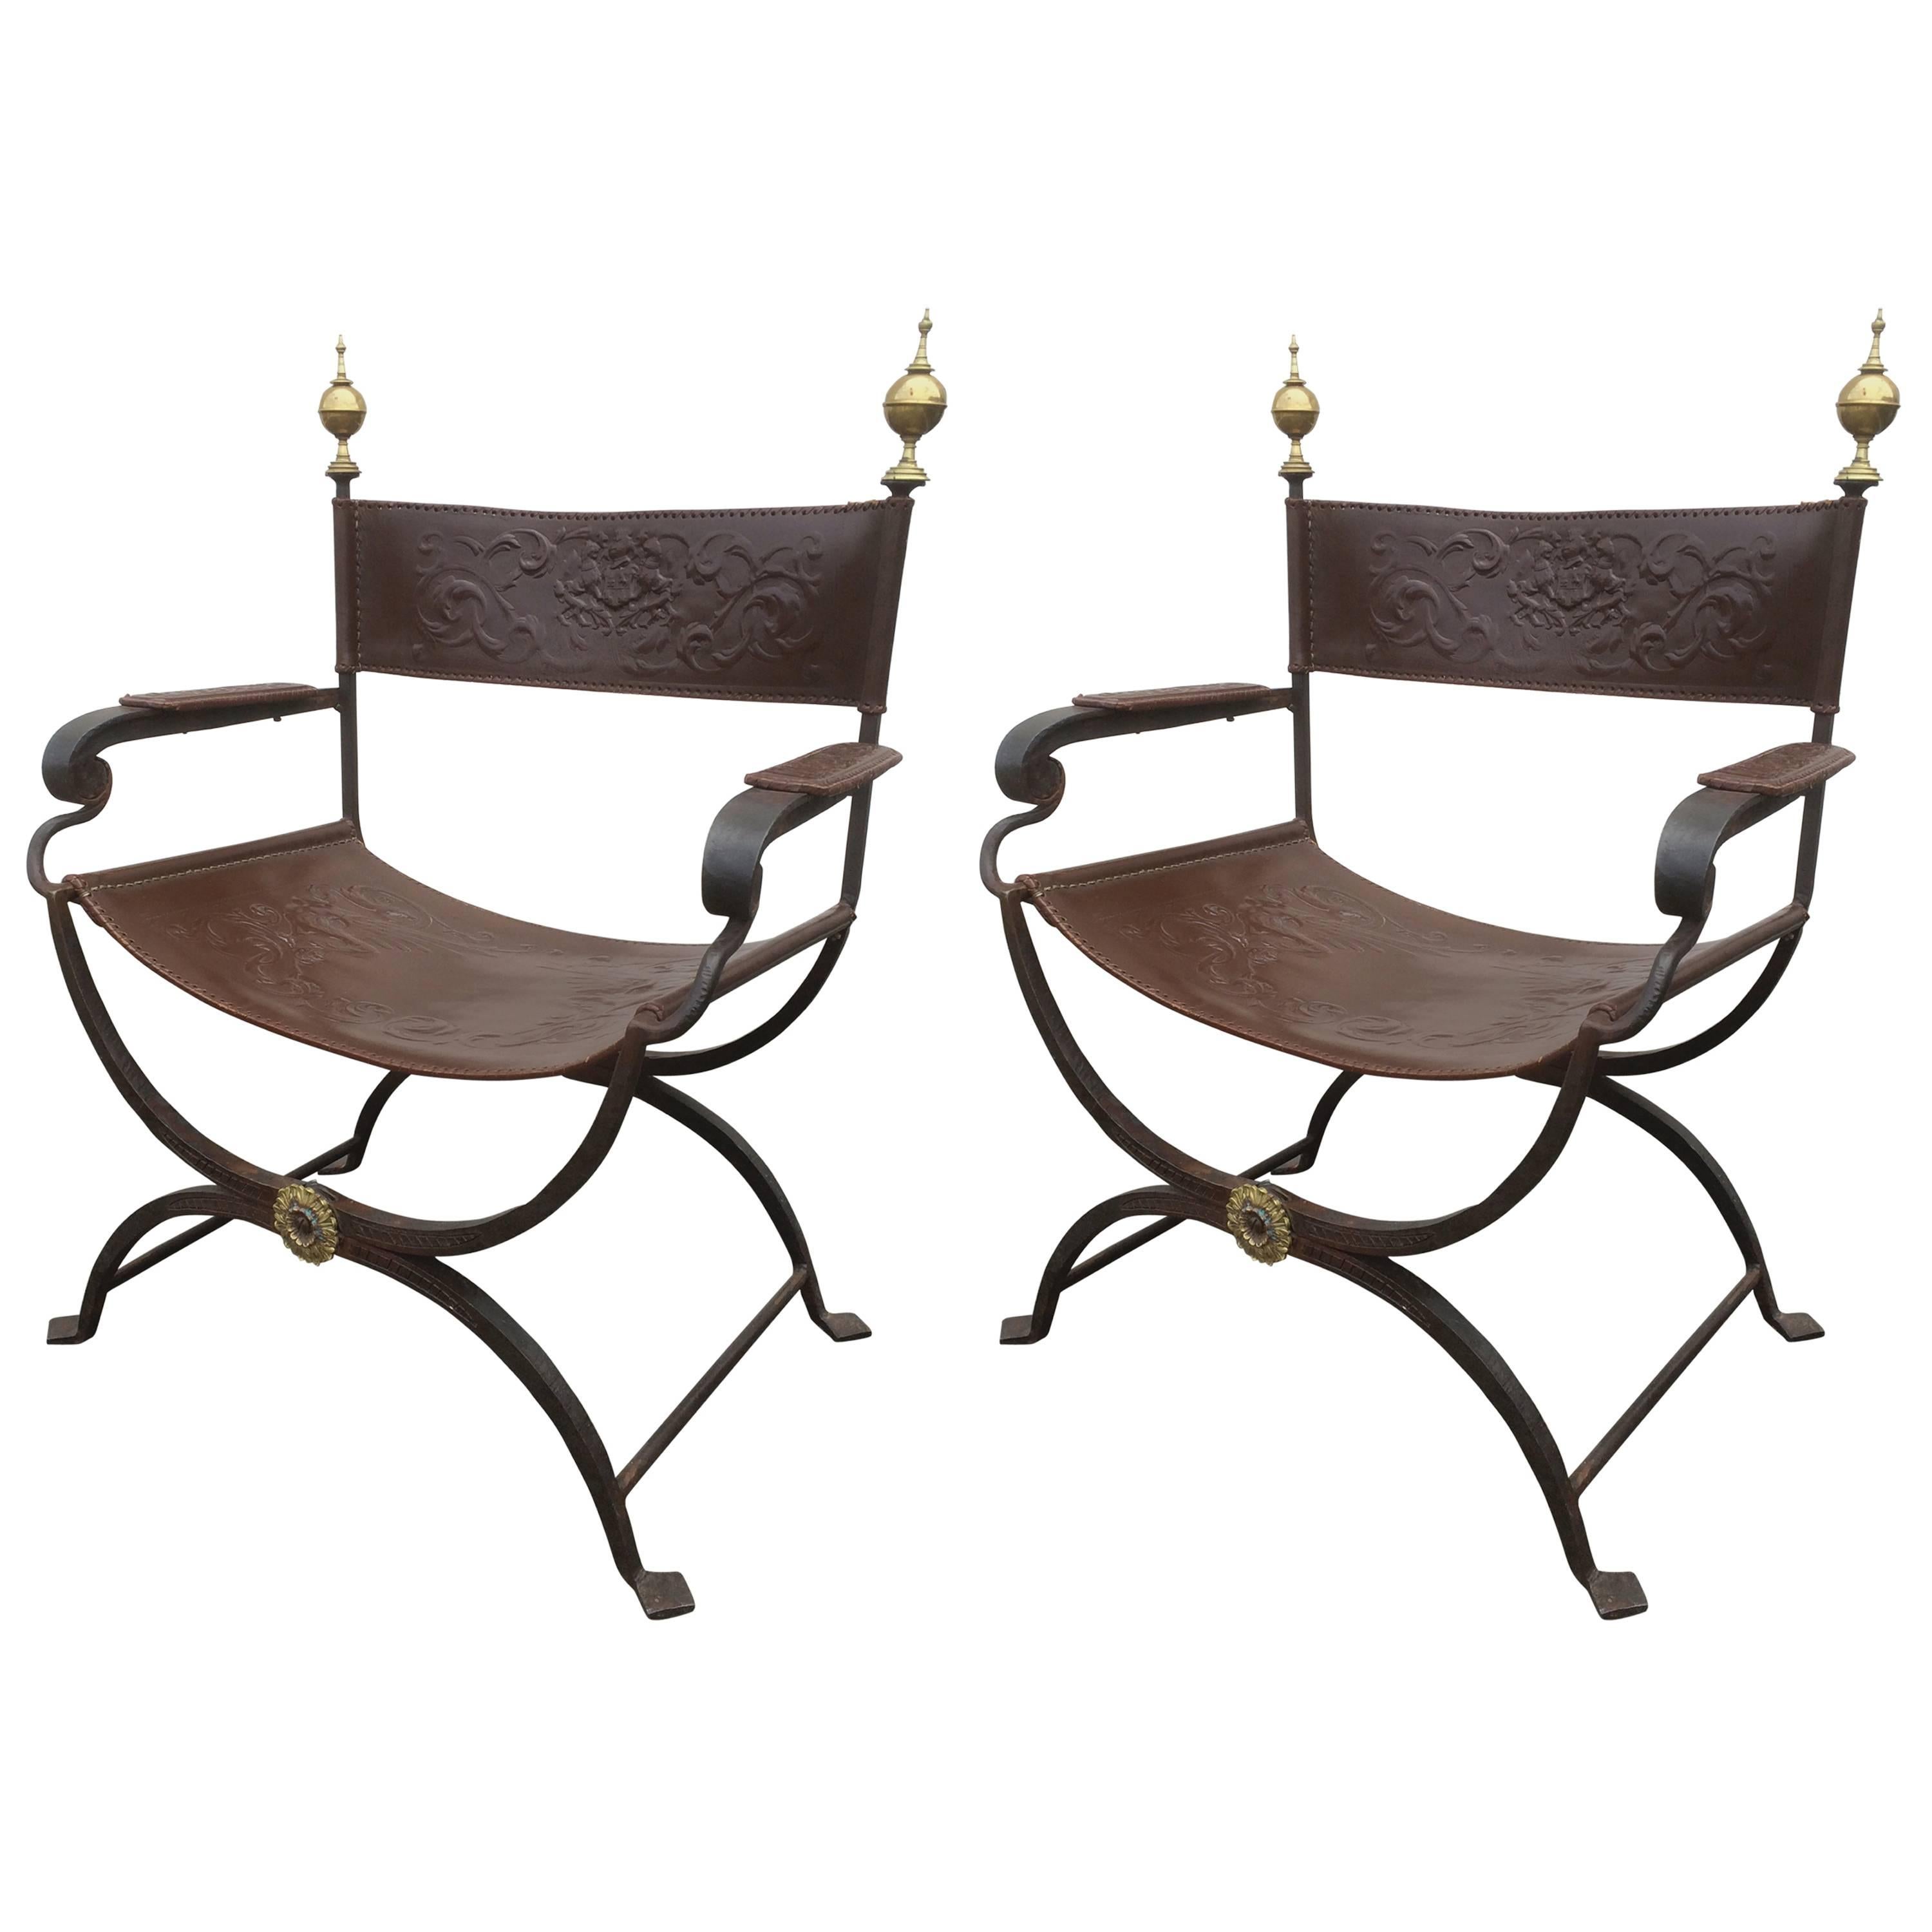 Pair of Wrought Iron Curule Chairs